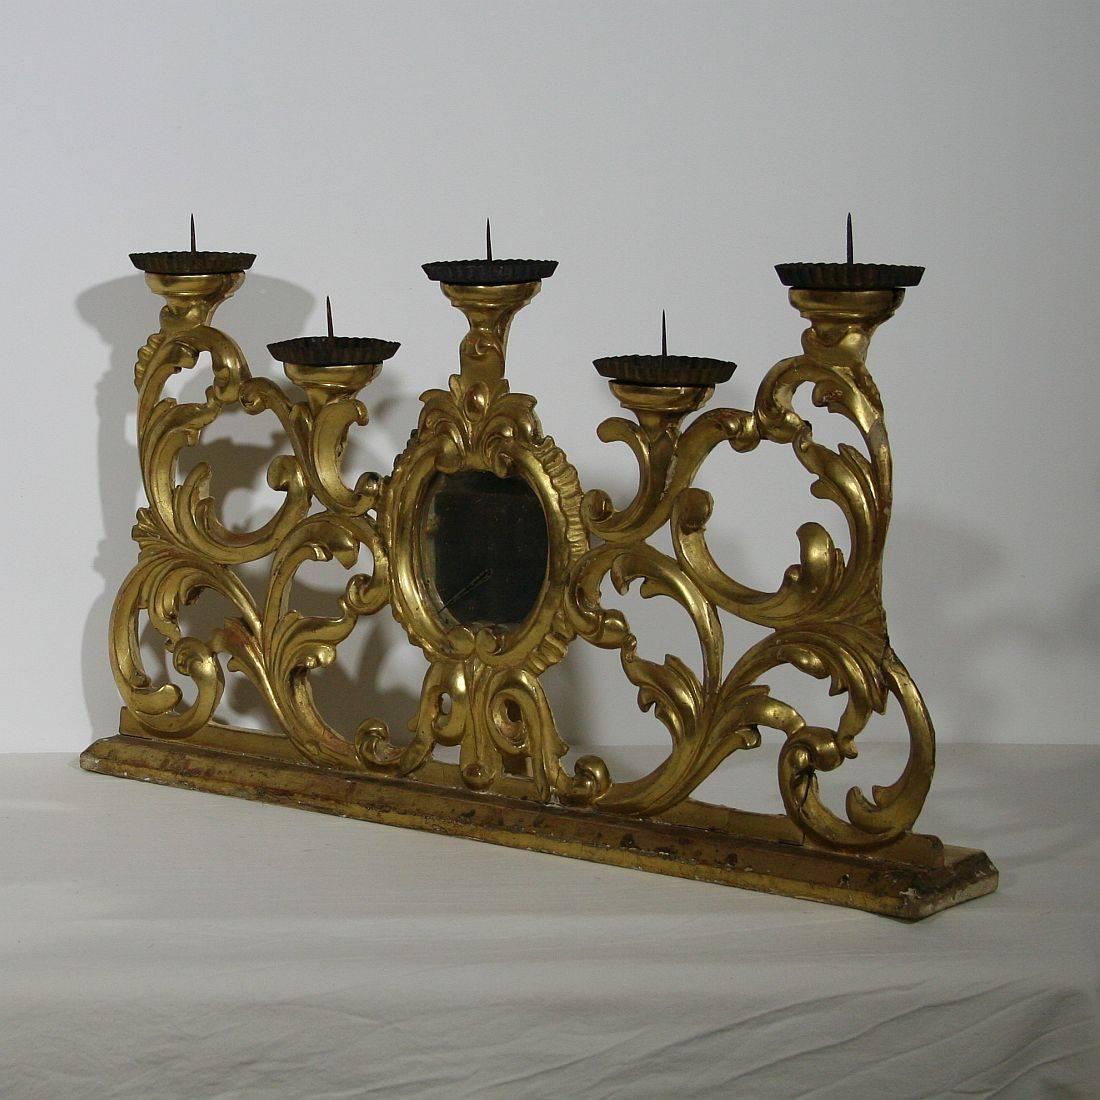 Carved Large 18th Century Italian Giltwood Baroque Candleholder with Mirror